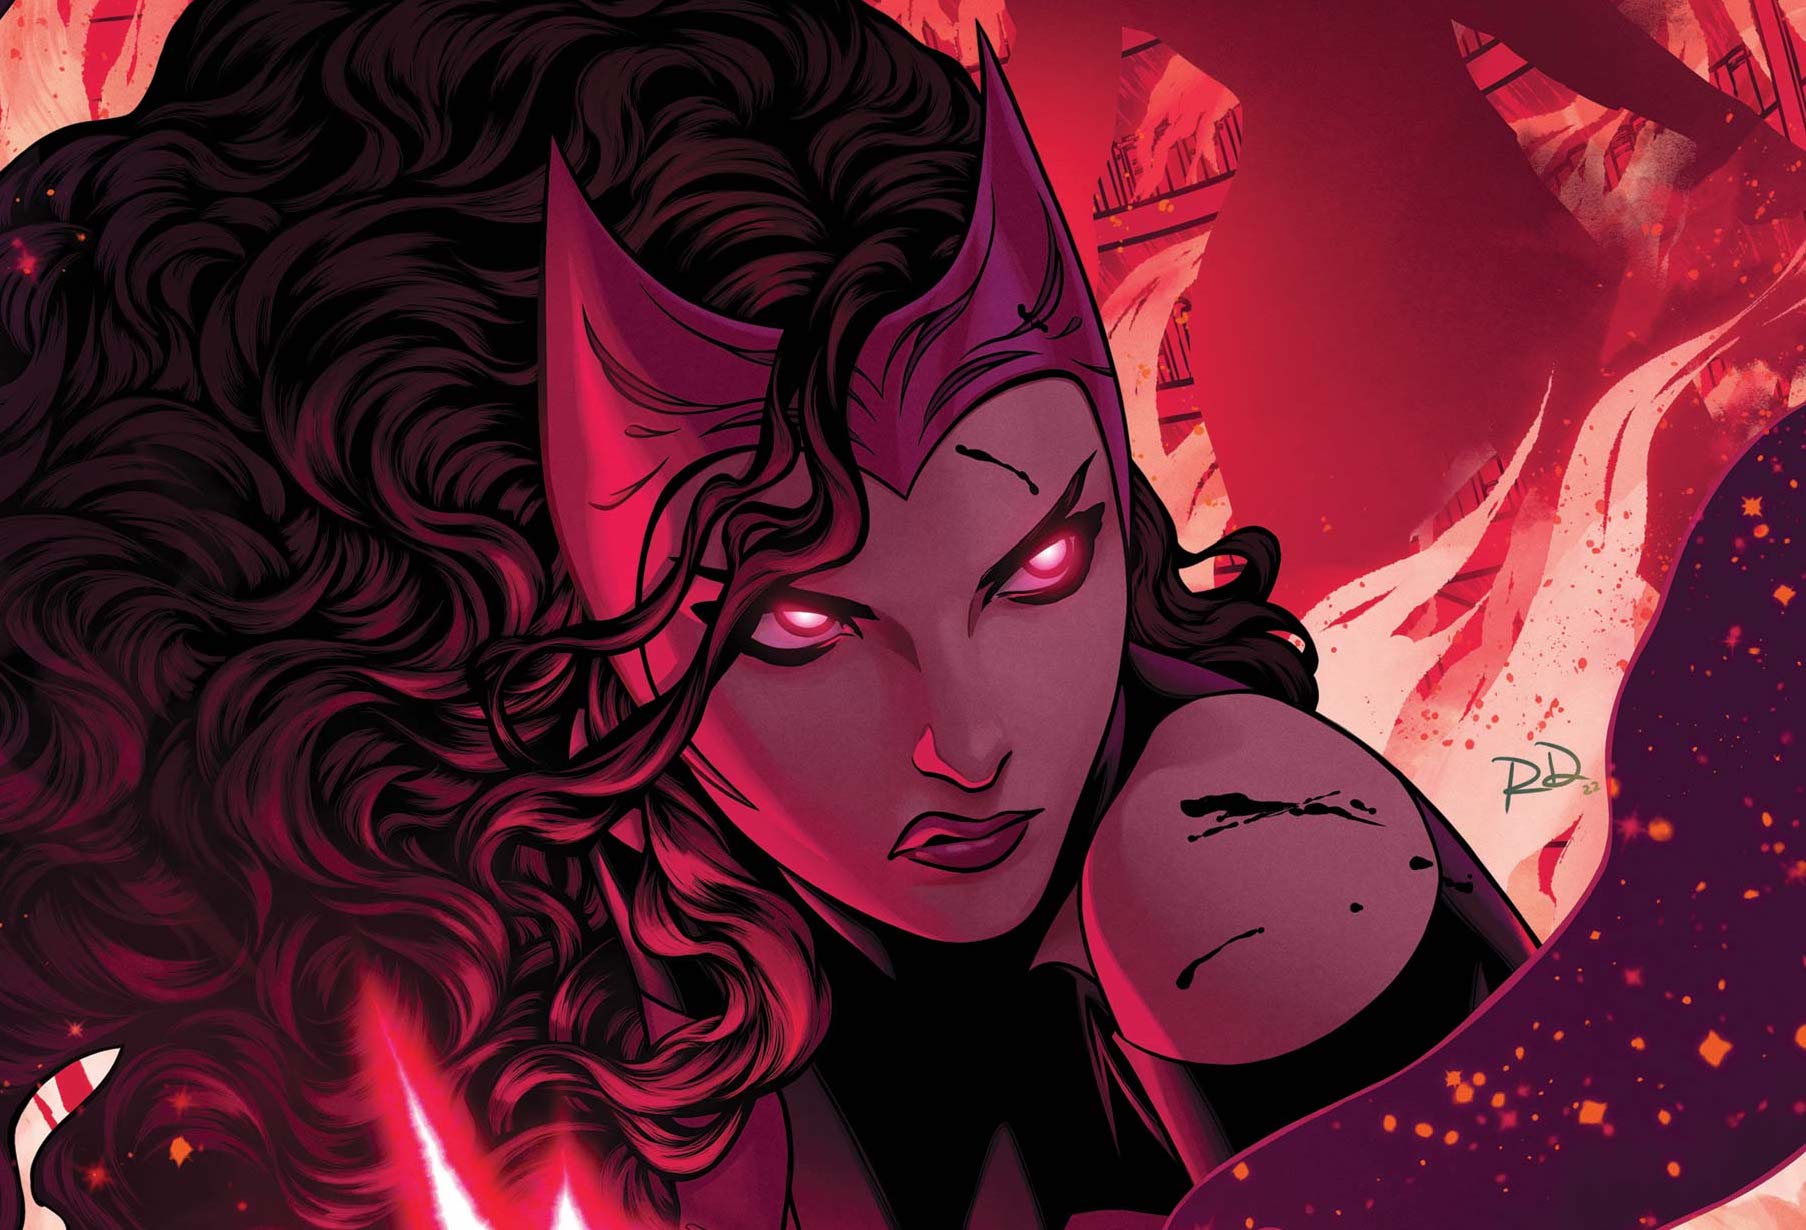 Vision And The Scarlet Witch V1 4  Read Vision And The Scarlet Witch V1 4  comic online in high quality. Read Full Comic online for free - Read comics  online in